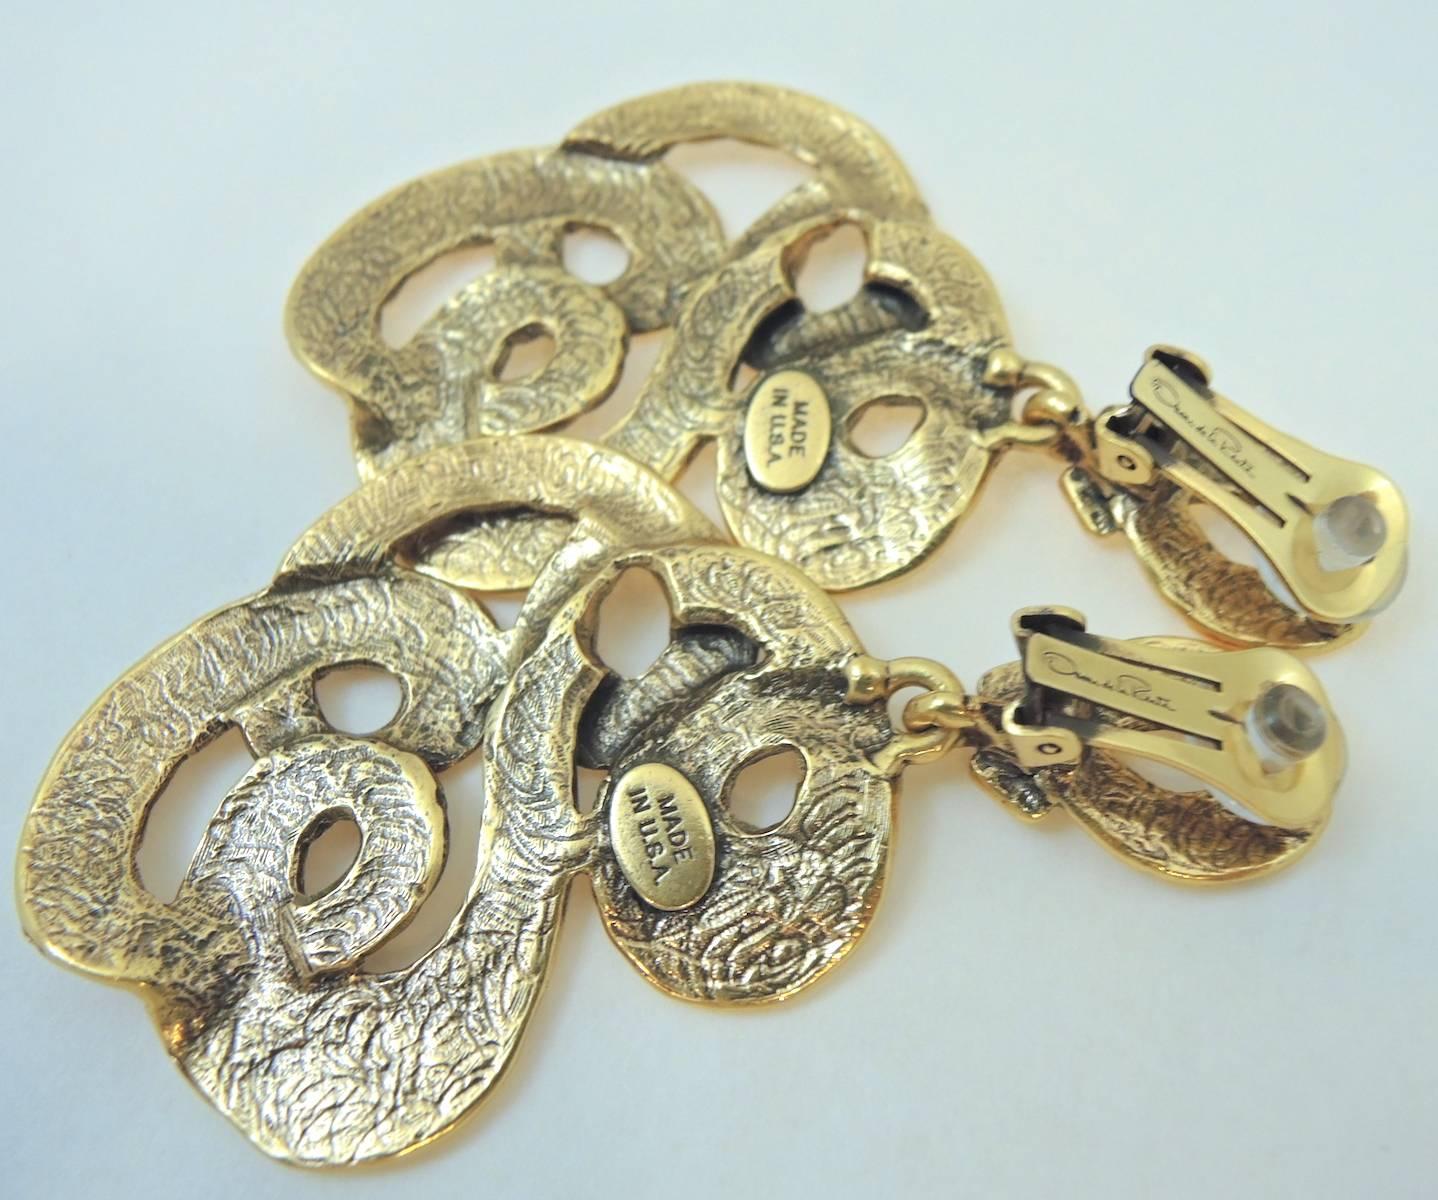 These long Oscar De La Renta clip earrings are very chic and can be worn with a multitude of necklaces.  They are made with a carved and swirl motif design and measure 3-1/2 x 2” in a gold tone setting. They are signed “Oscar De la Renta” “Made In